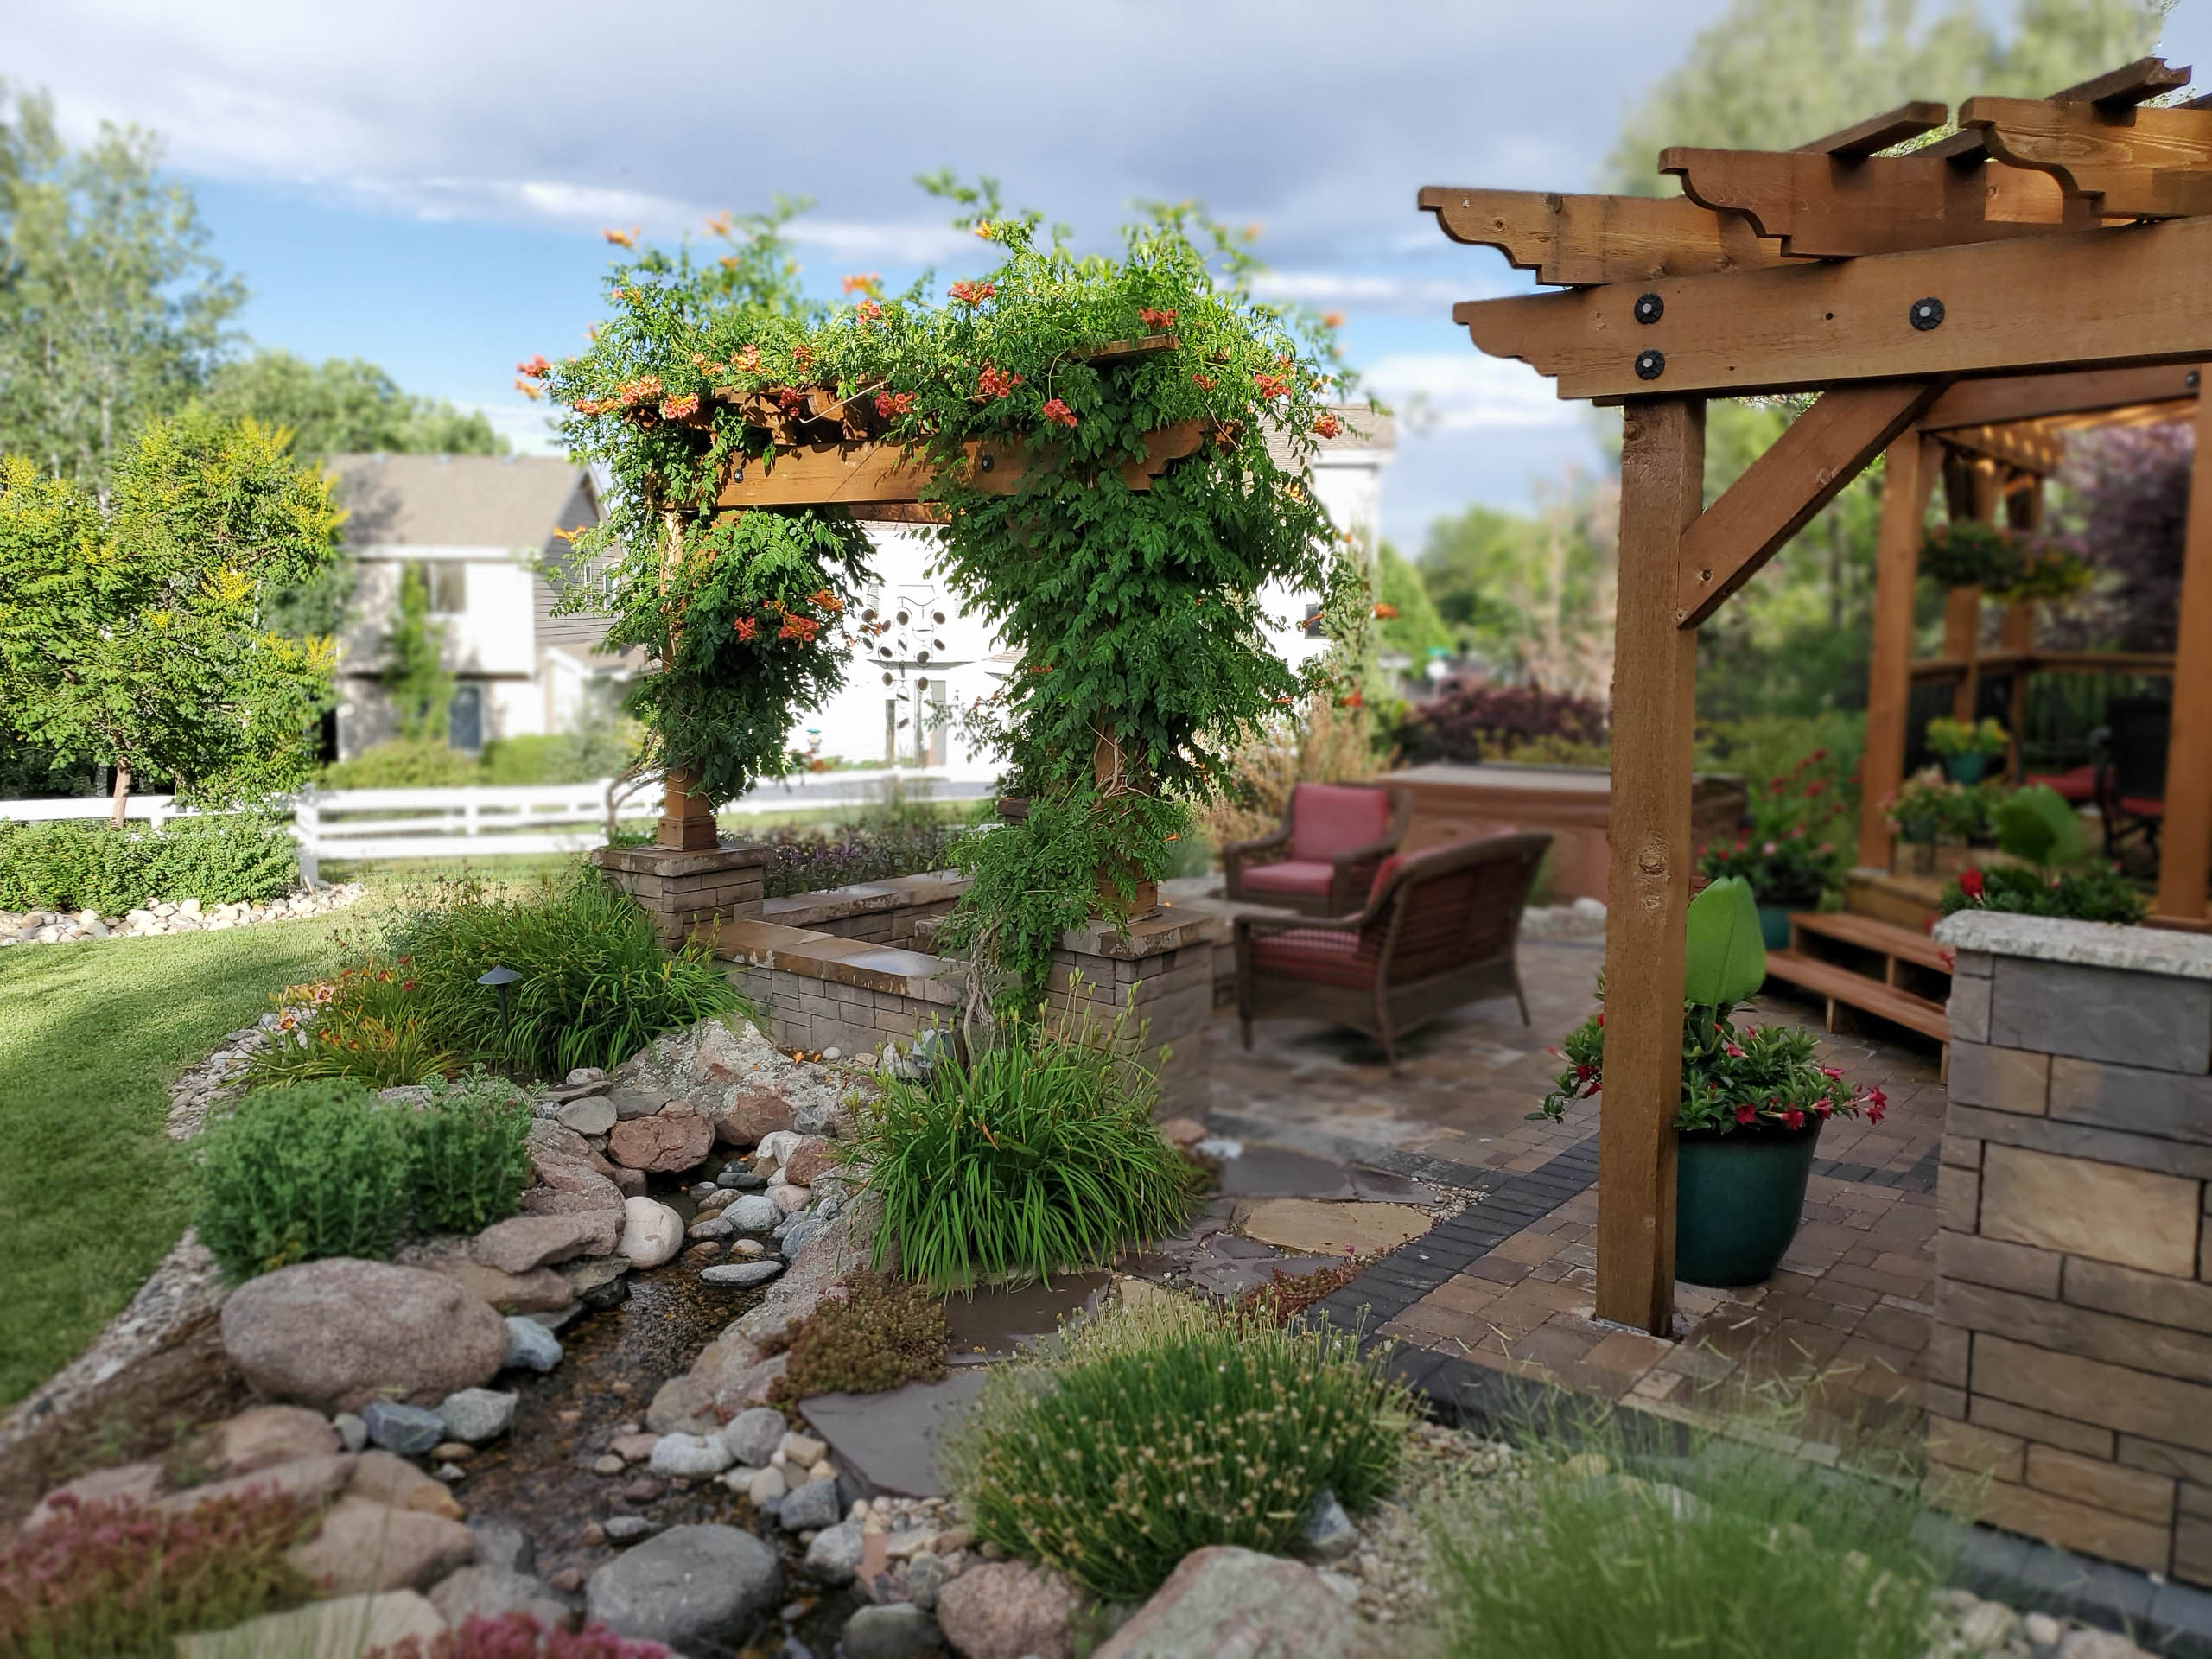 Outdoor Living With Our Loveland Co, Landscaping Loveland Colorado